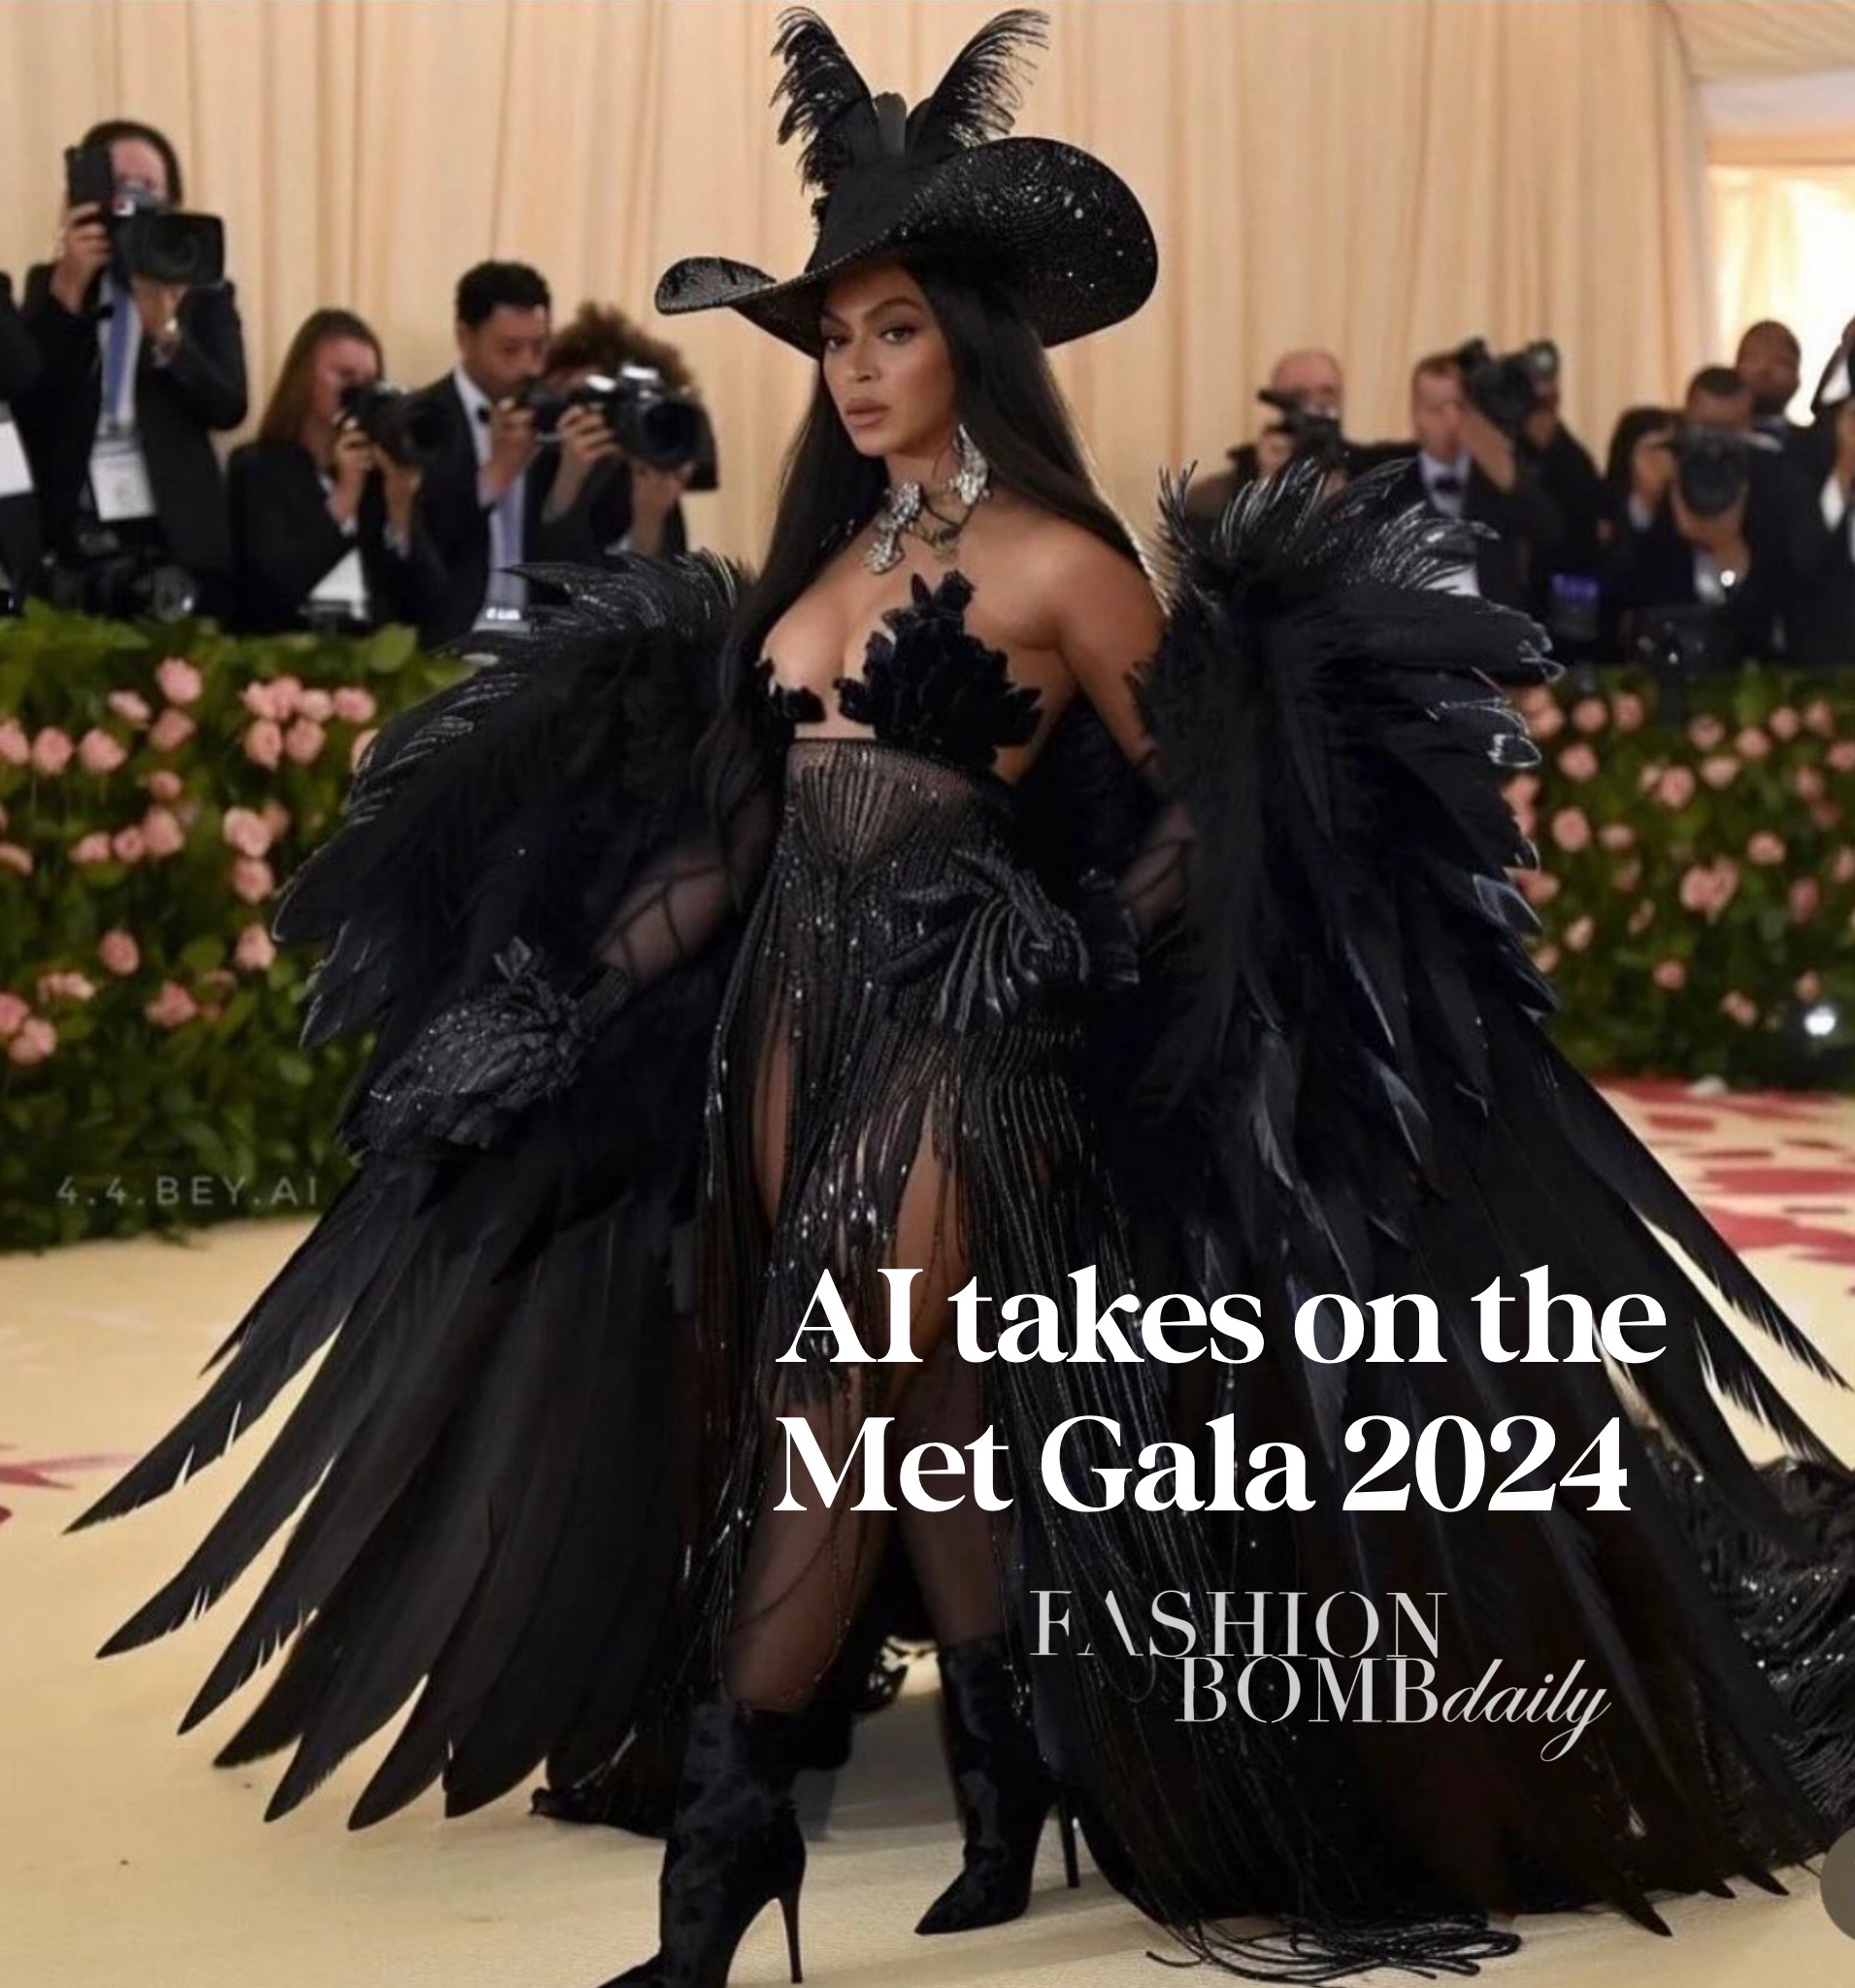 Artificial Intelligence (AI) Takes on the Met Gala 2024: Beyonce, Rihanna, Kanye West, Katy Perry and More in Fictional Garden Inspired Looks